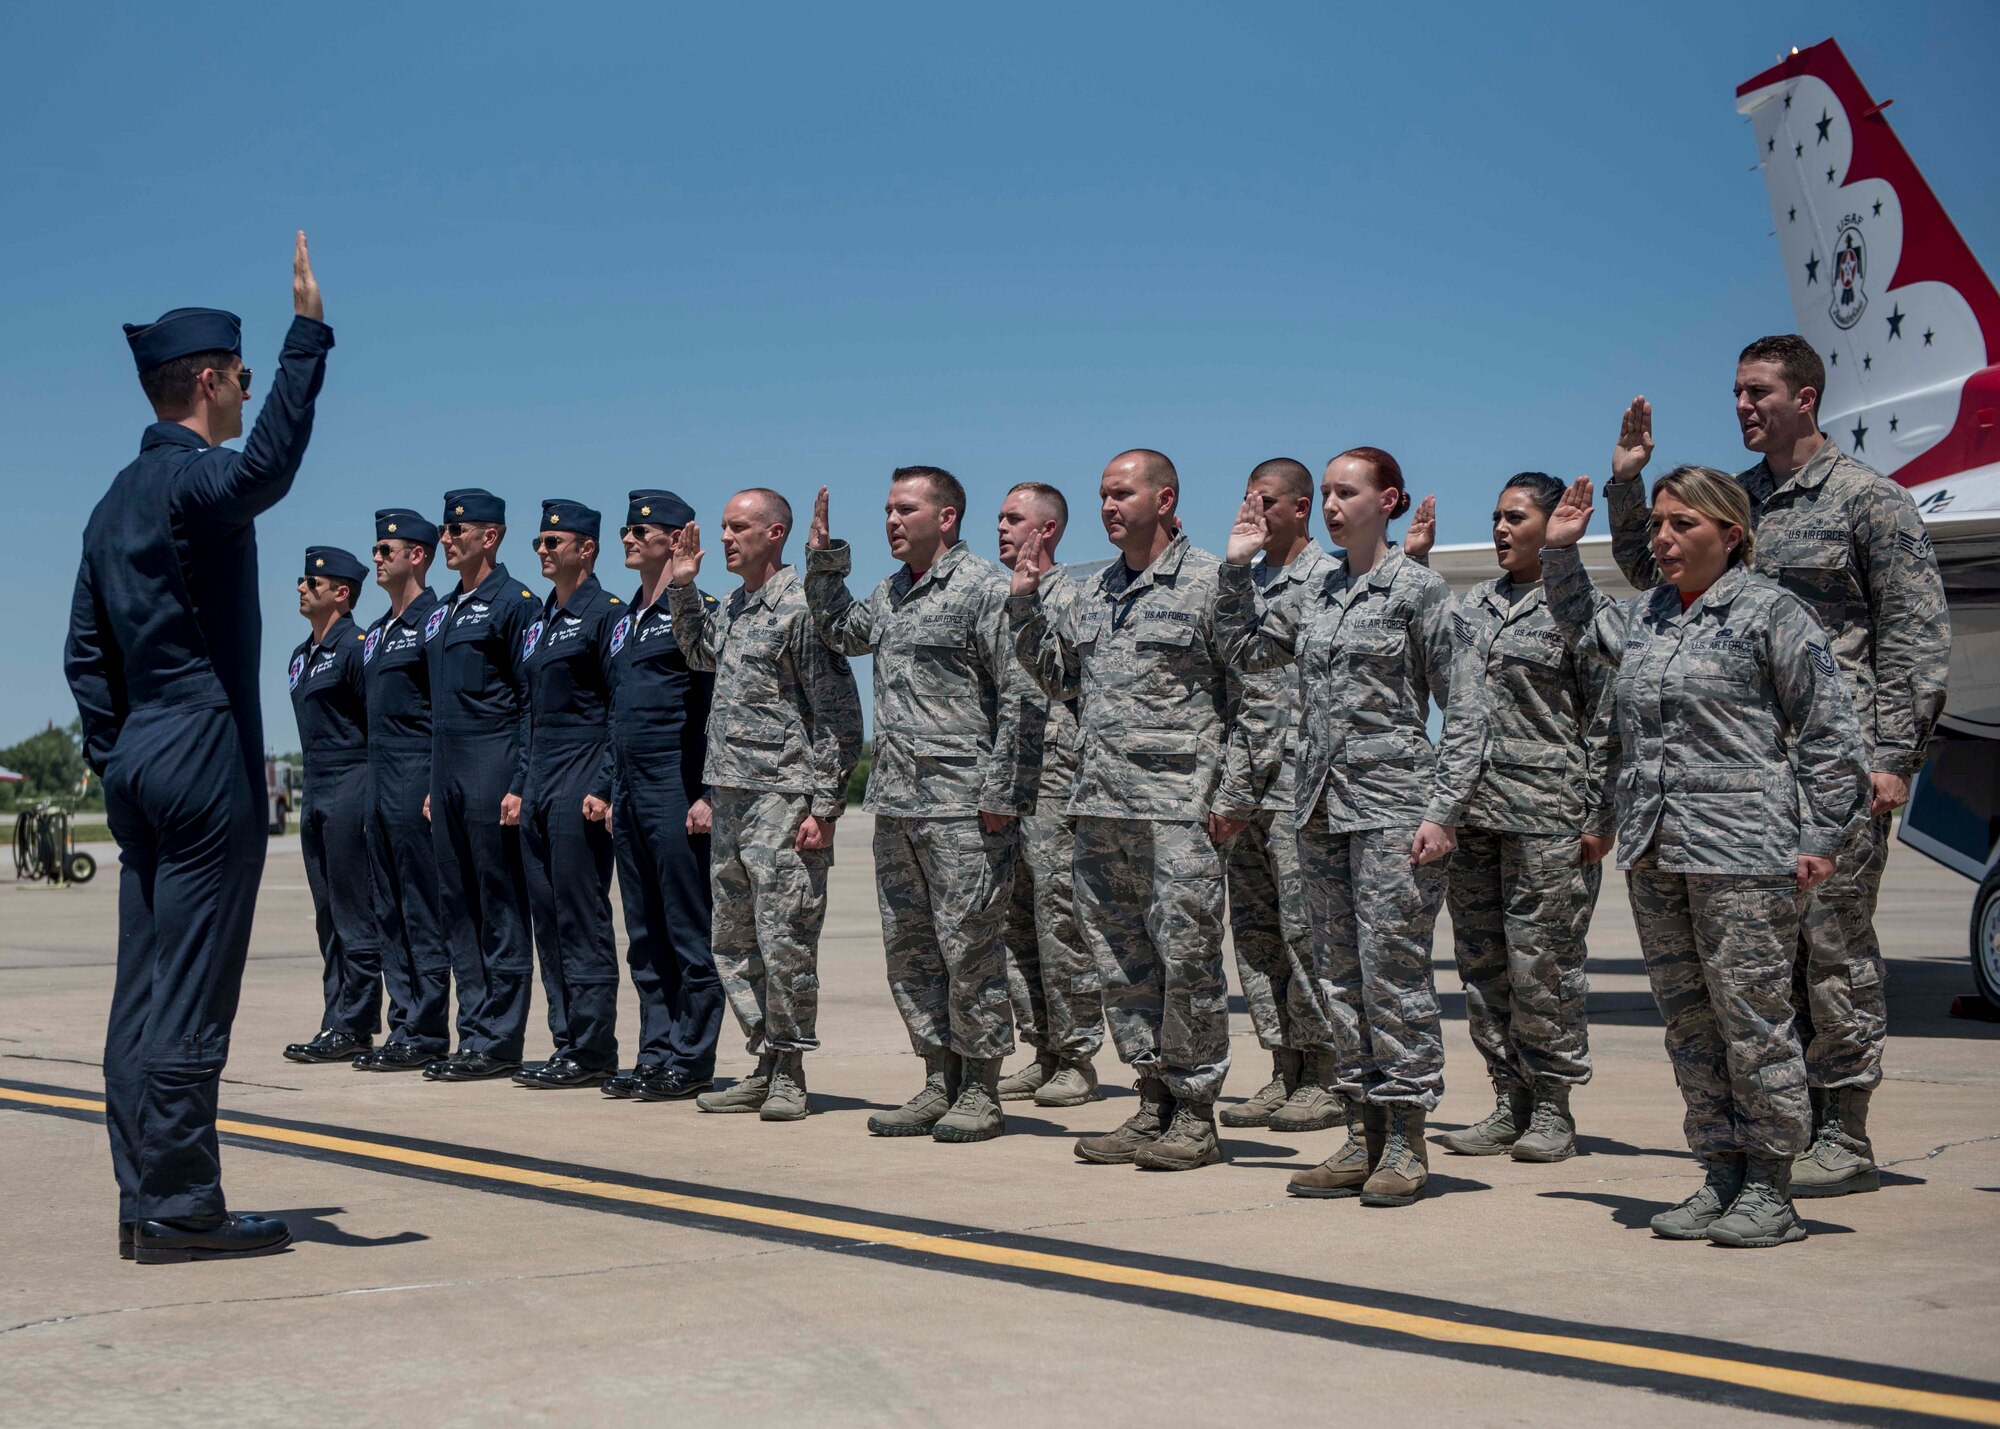 A group of Airmen reenlist into the Air Force with the Thunderbirds during the Scott Air Force Base Air Show, Scott Air Force Base, Ill., June 11, 2017. The base hosted the air show and open house to celebrate the 100th year of Scott AFB.  Over 50 aircraft, ranging from WWI’s Curtiss JN-4 Jenny to the currently utilized KC-135 Stratotanker, came to Scott, the fourth oldest Air Force base. Demonstrations included the Black Daggers, “Tora, Tora, Tora,” and the USAF Thunderbirds. Opened in 1917 and previously named Scott Field, the base has seen its mission evolve and expand to encompass a multitude of priorities, including aeromedical evacuation and communications.  Today, Scott is home to 31 mission partners and provides around-the-clock logistics support and rapid global mobility, carried out primarily by U.S. Transportation Command and Air Mobility Command.